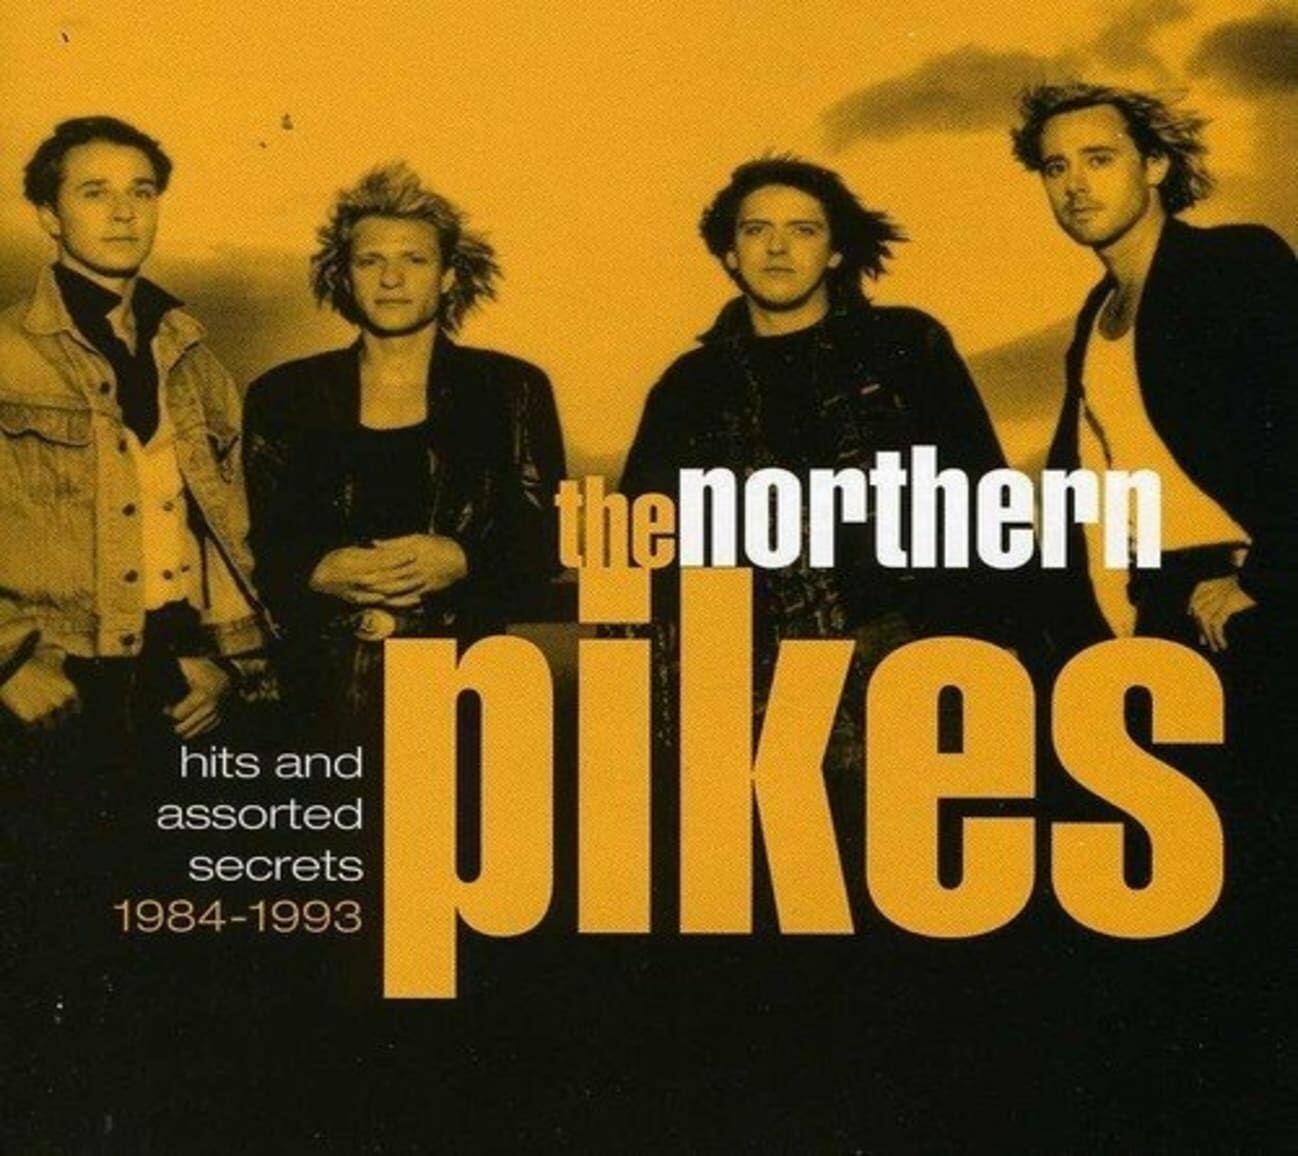 The Northern Pikes: 1984-1993 Hits And Assorted (CD) on MovieShack